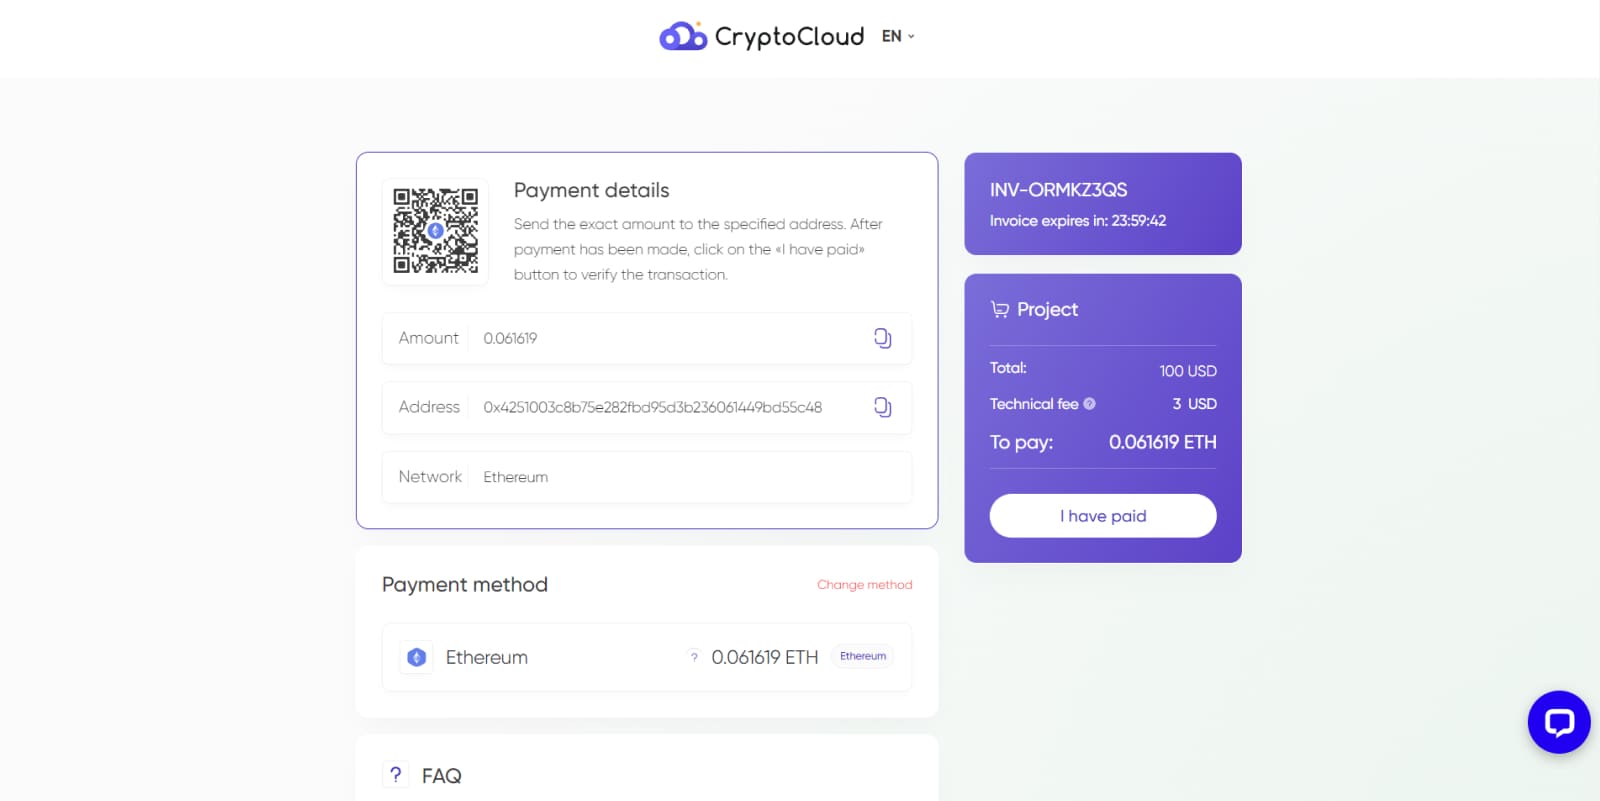 CryptoCloud offers to make a test payment to verify the integration.